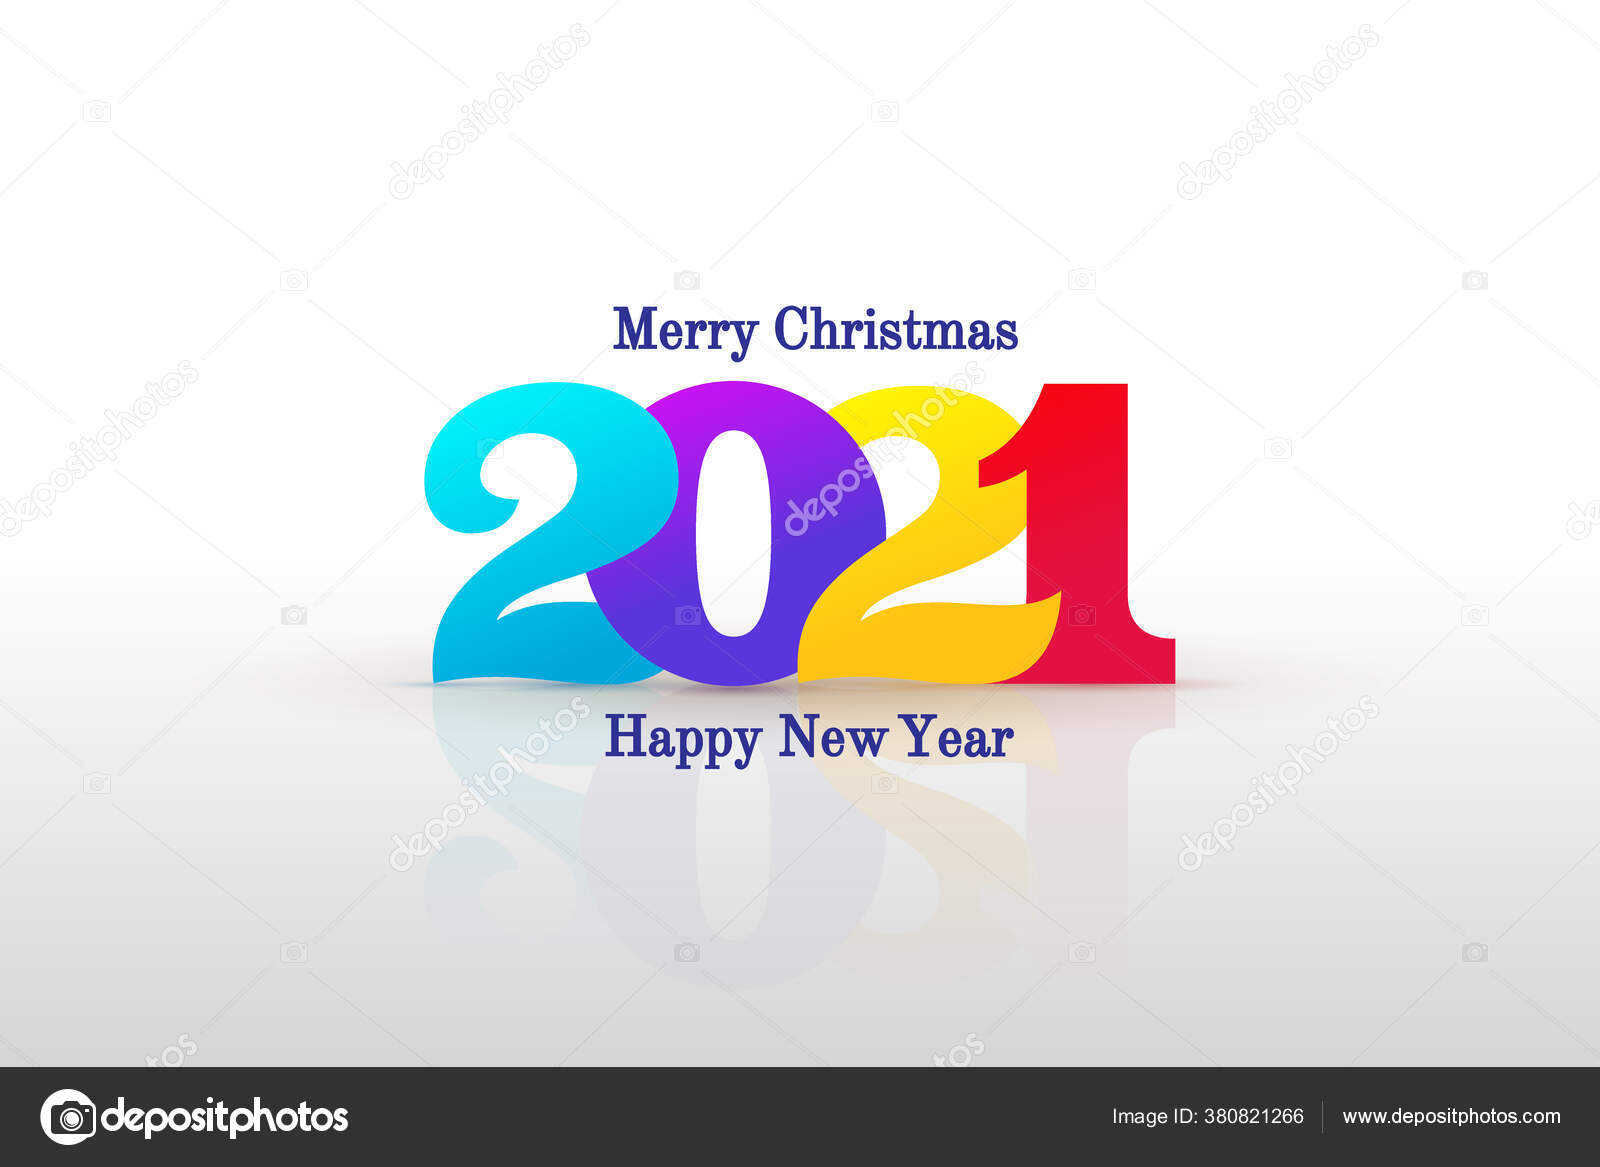 Happy New Year Design Colored 2021 Numbers Typography Logo 2021 Stock Vector C Artkovalev 380821266